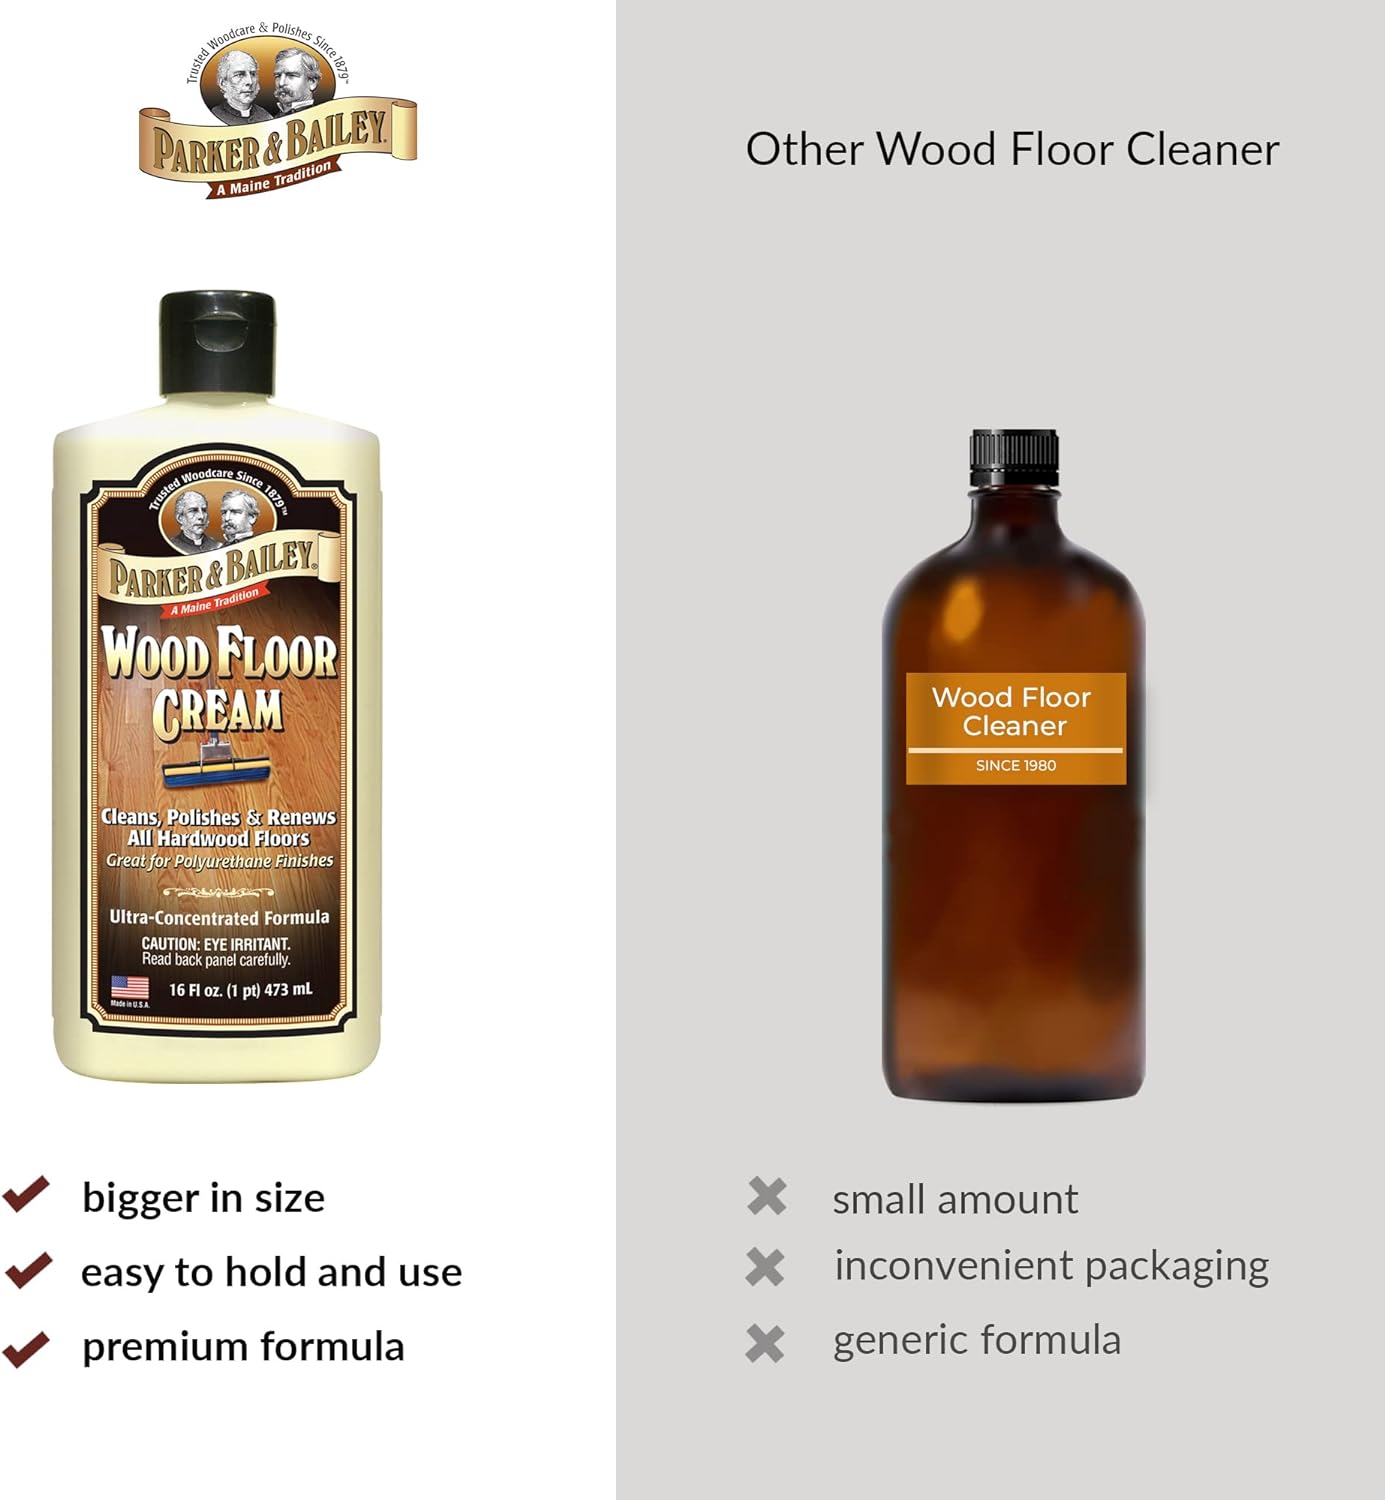 PARKER & BAILEY WOOD FLOOR CREAM – Use on Hardwood, Laminated or Faux Finished Floors. Shine Restorer Protector, Surface Cleaner House Cleaning Supplies Home Improvement, Natural Look, Cuts Grease : Health & Household